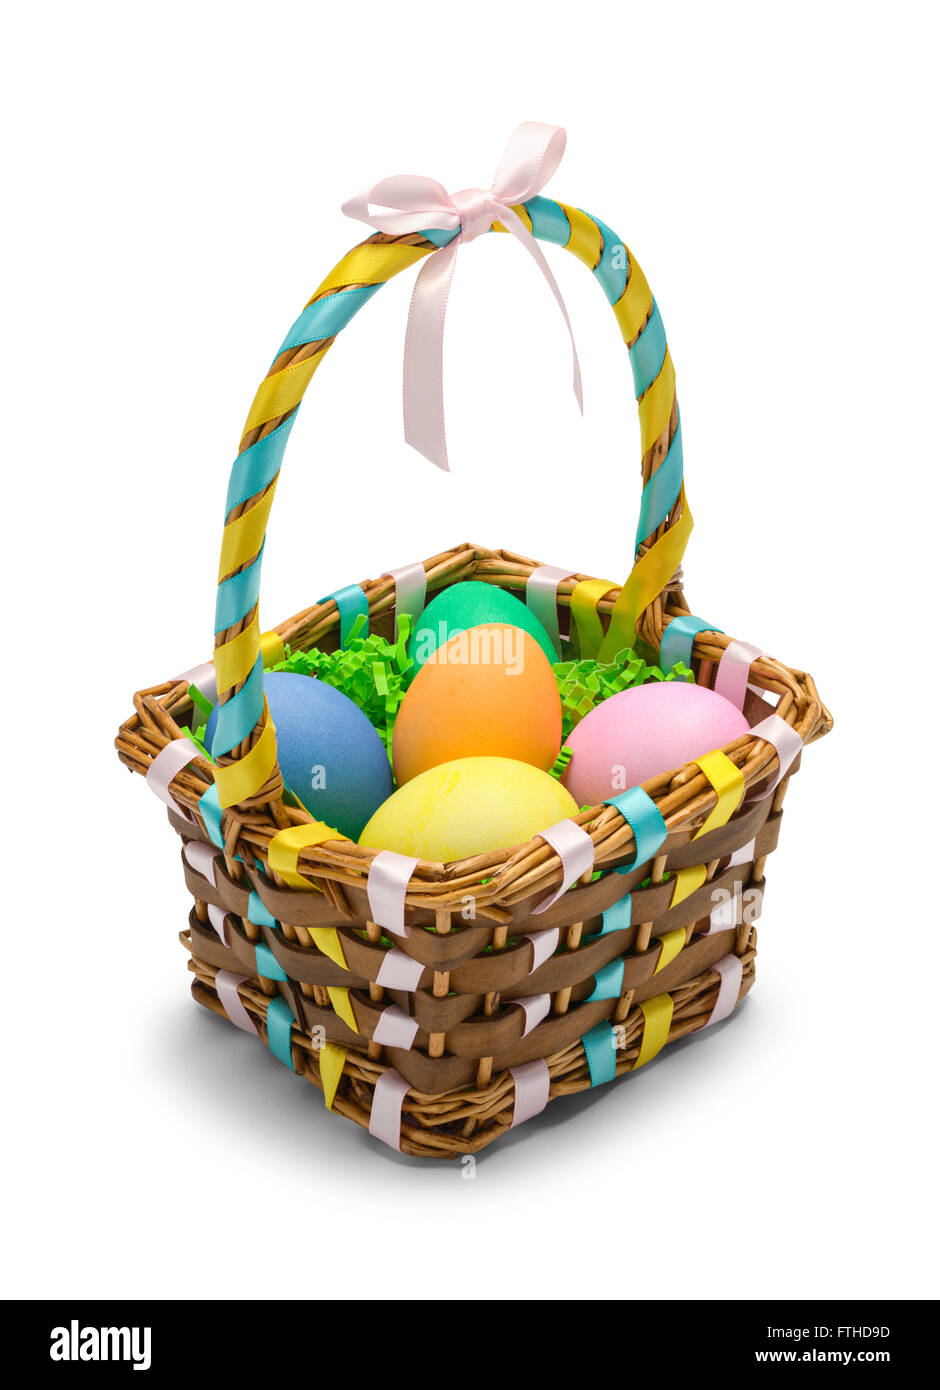 Easter Basket with Colored Eggs Isolated on White Background. Stock Photo